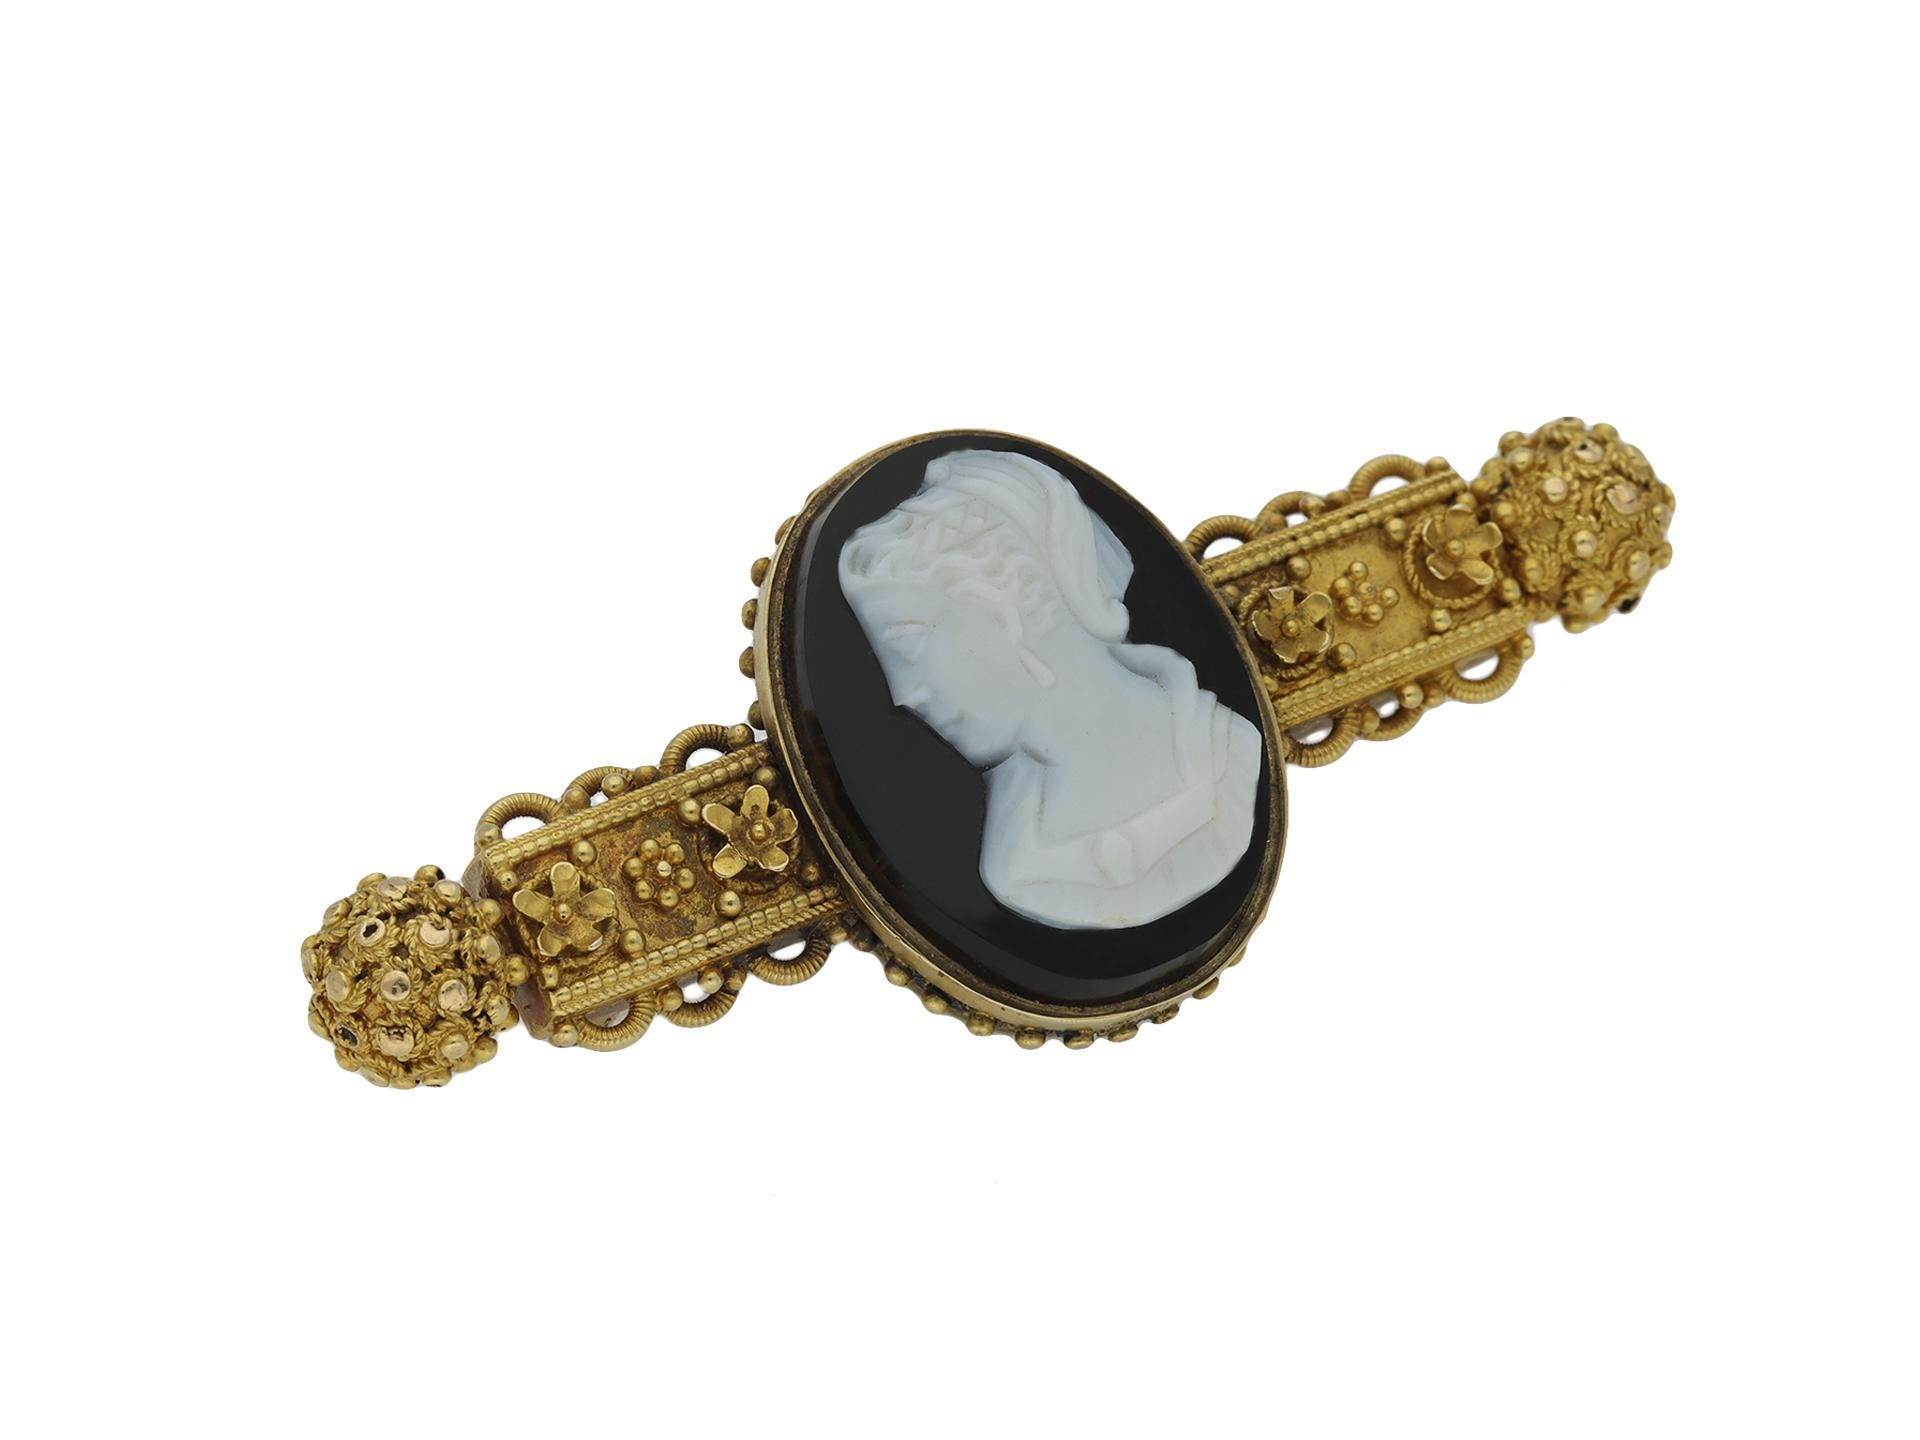 Hardstone cameo brooch. Set with a carved hardstone cameo to centre of a bust of a lady in profile within a yellow gold ornate horizontal form, with gold wirework, floral beading and terminating with two circular clusters. Fitted with bar and